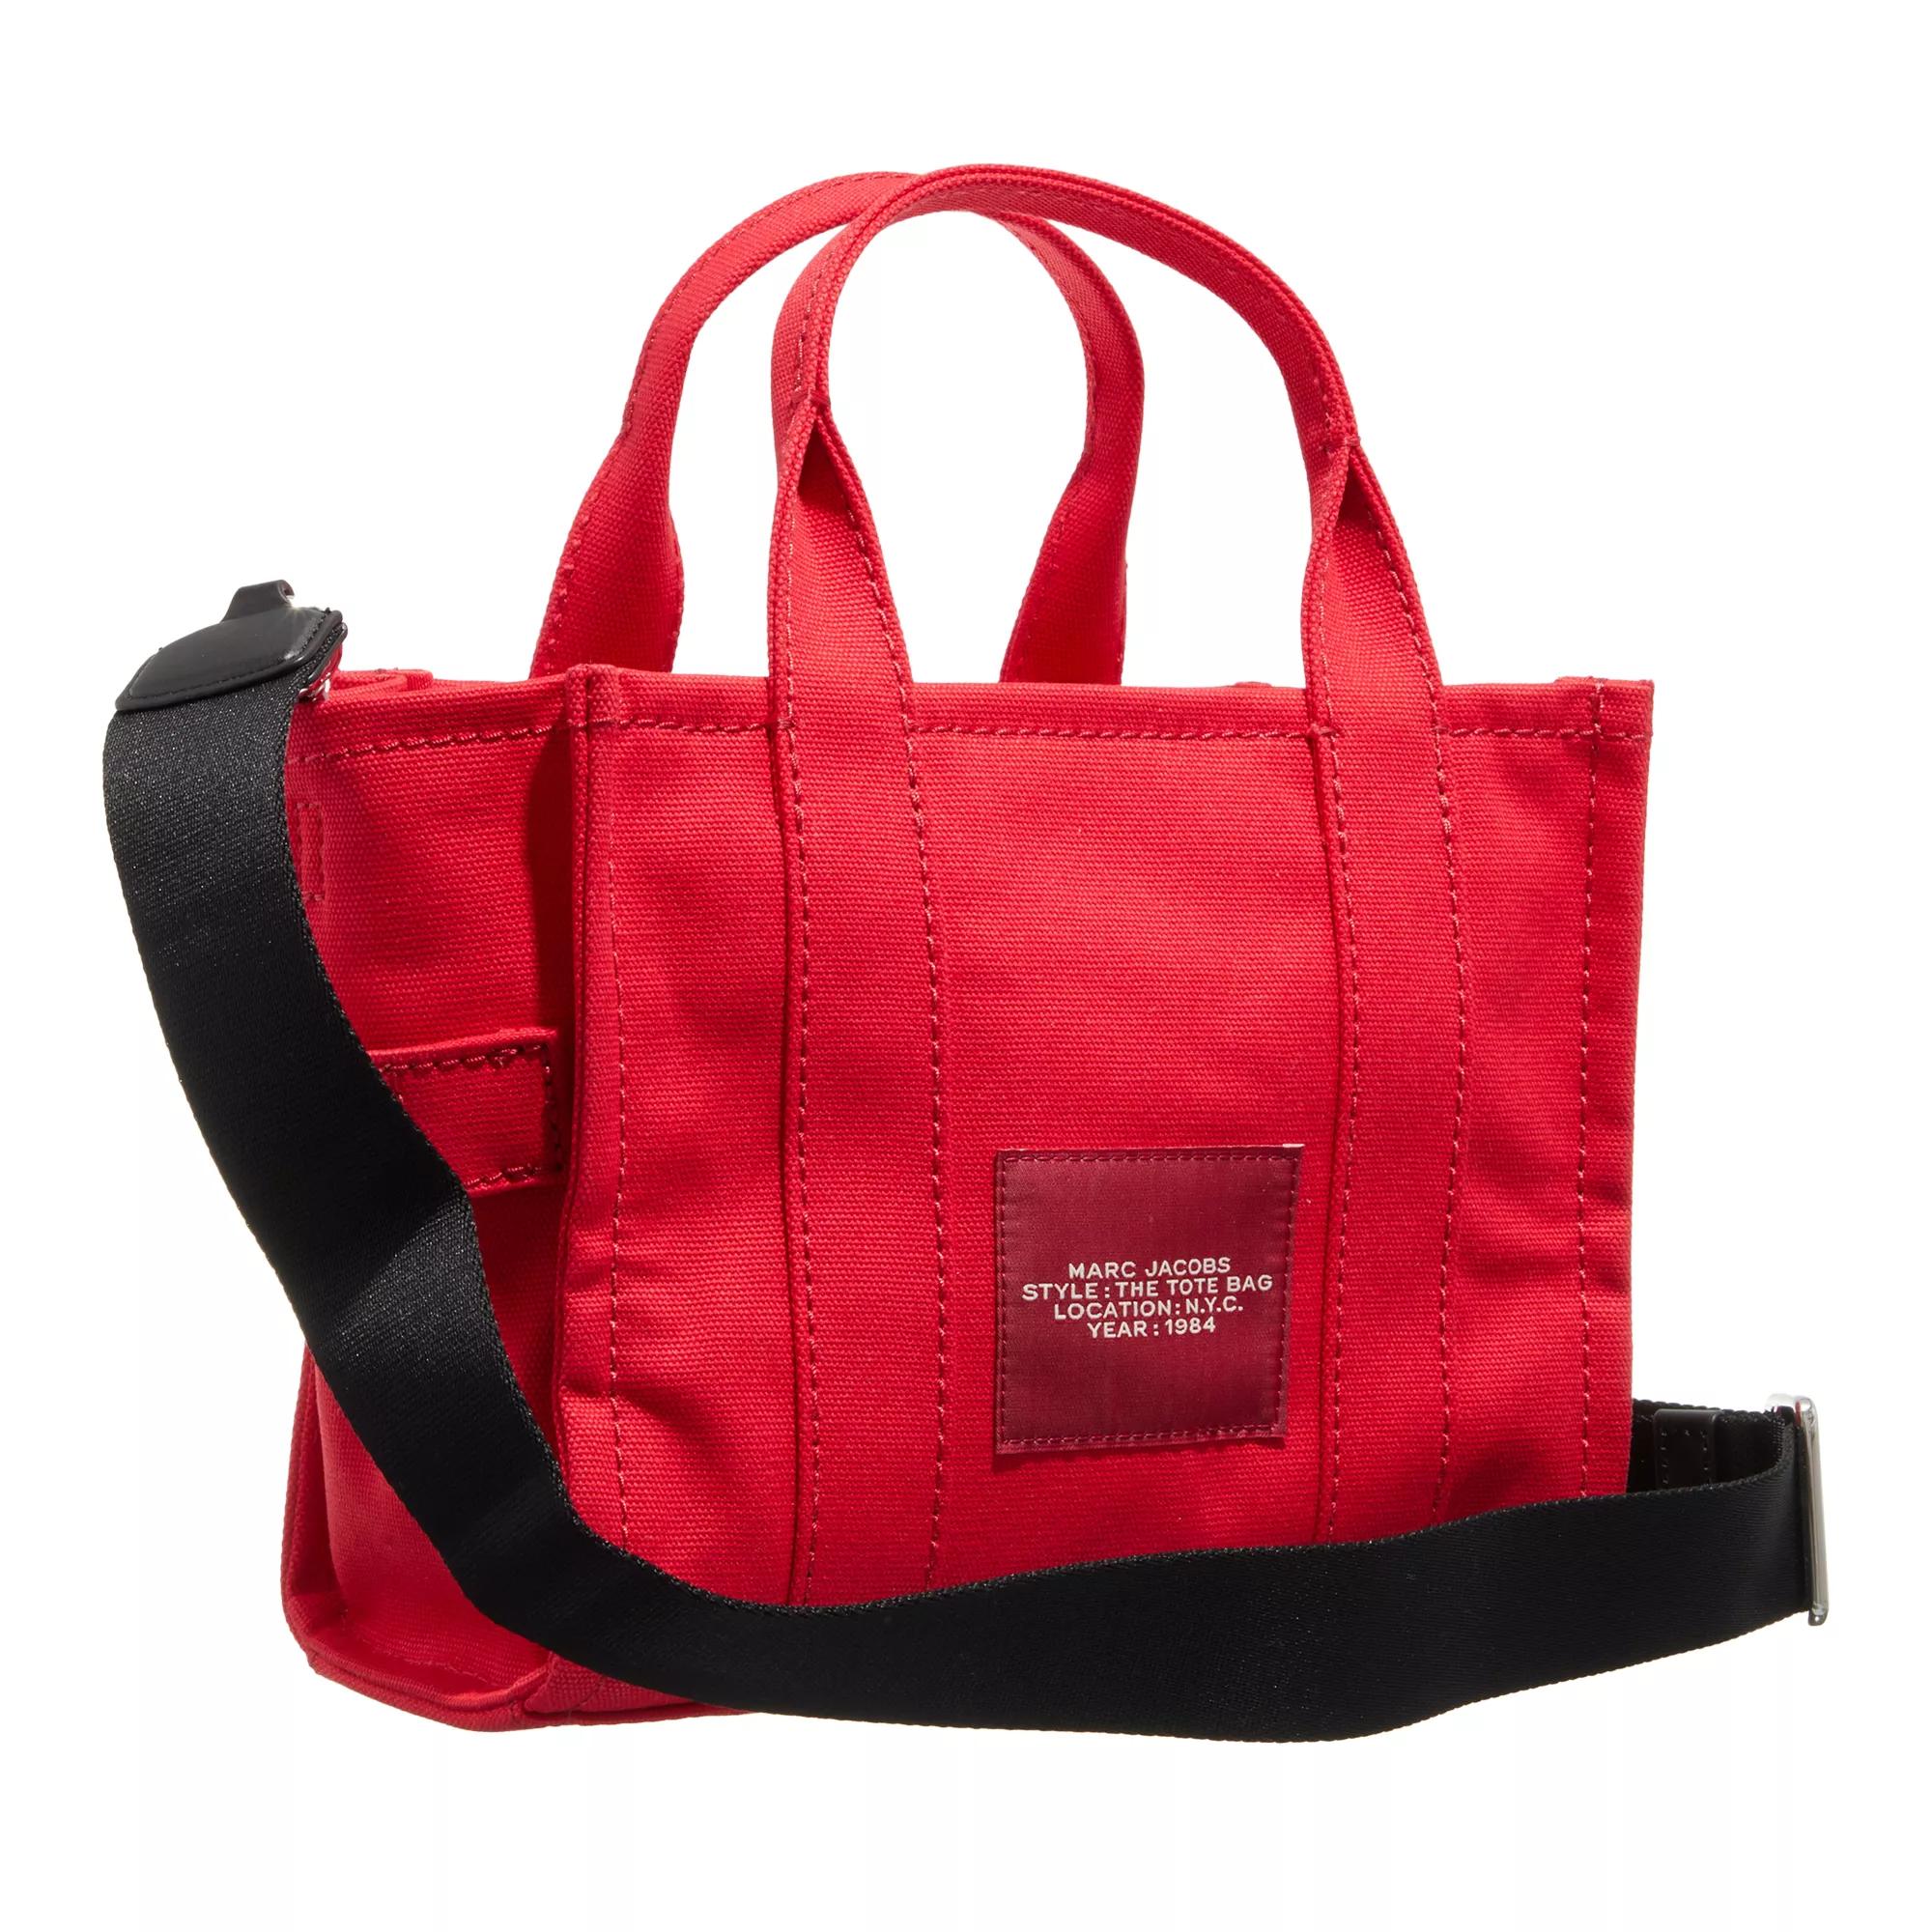 Marc Jacobs Totes The Small Tote Bag in rood